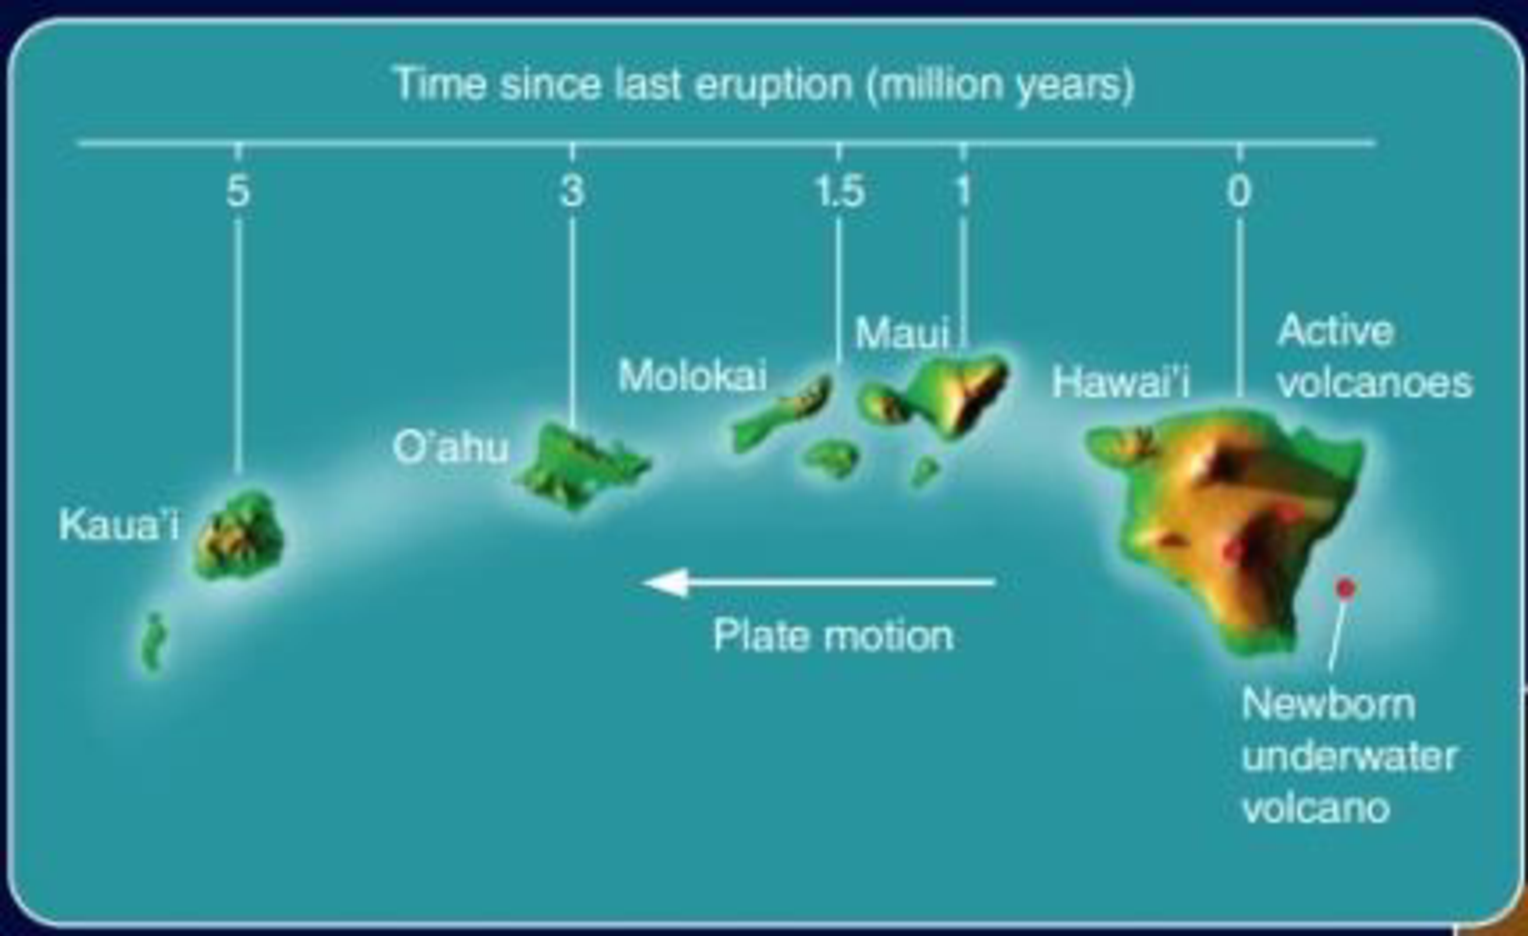 Chapter 22, Problem 2LTL, Look at the map of the Hawaiian chain of islands on the right-hand page of the Concept Art: 